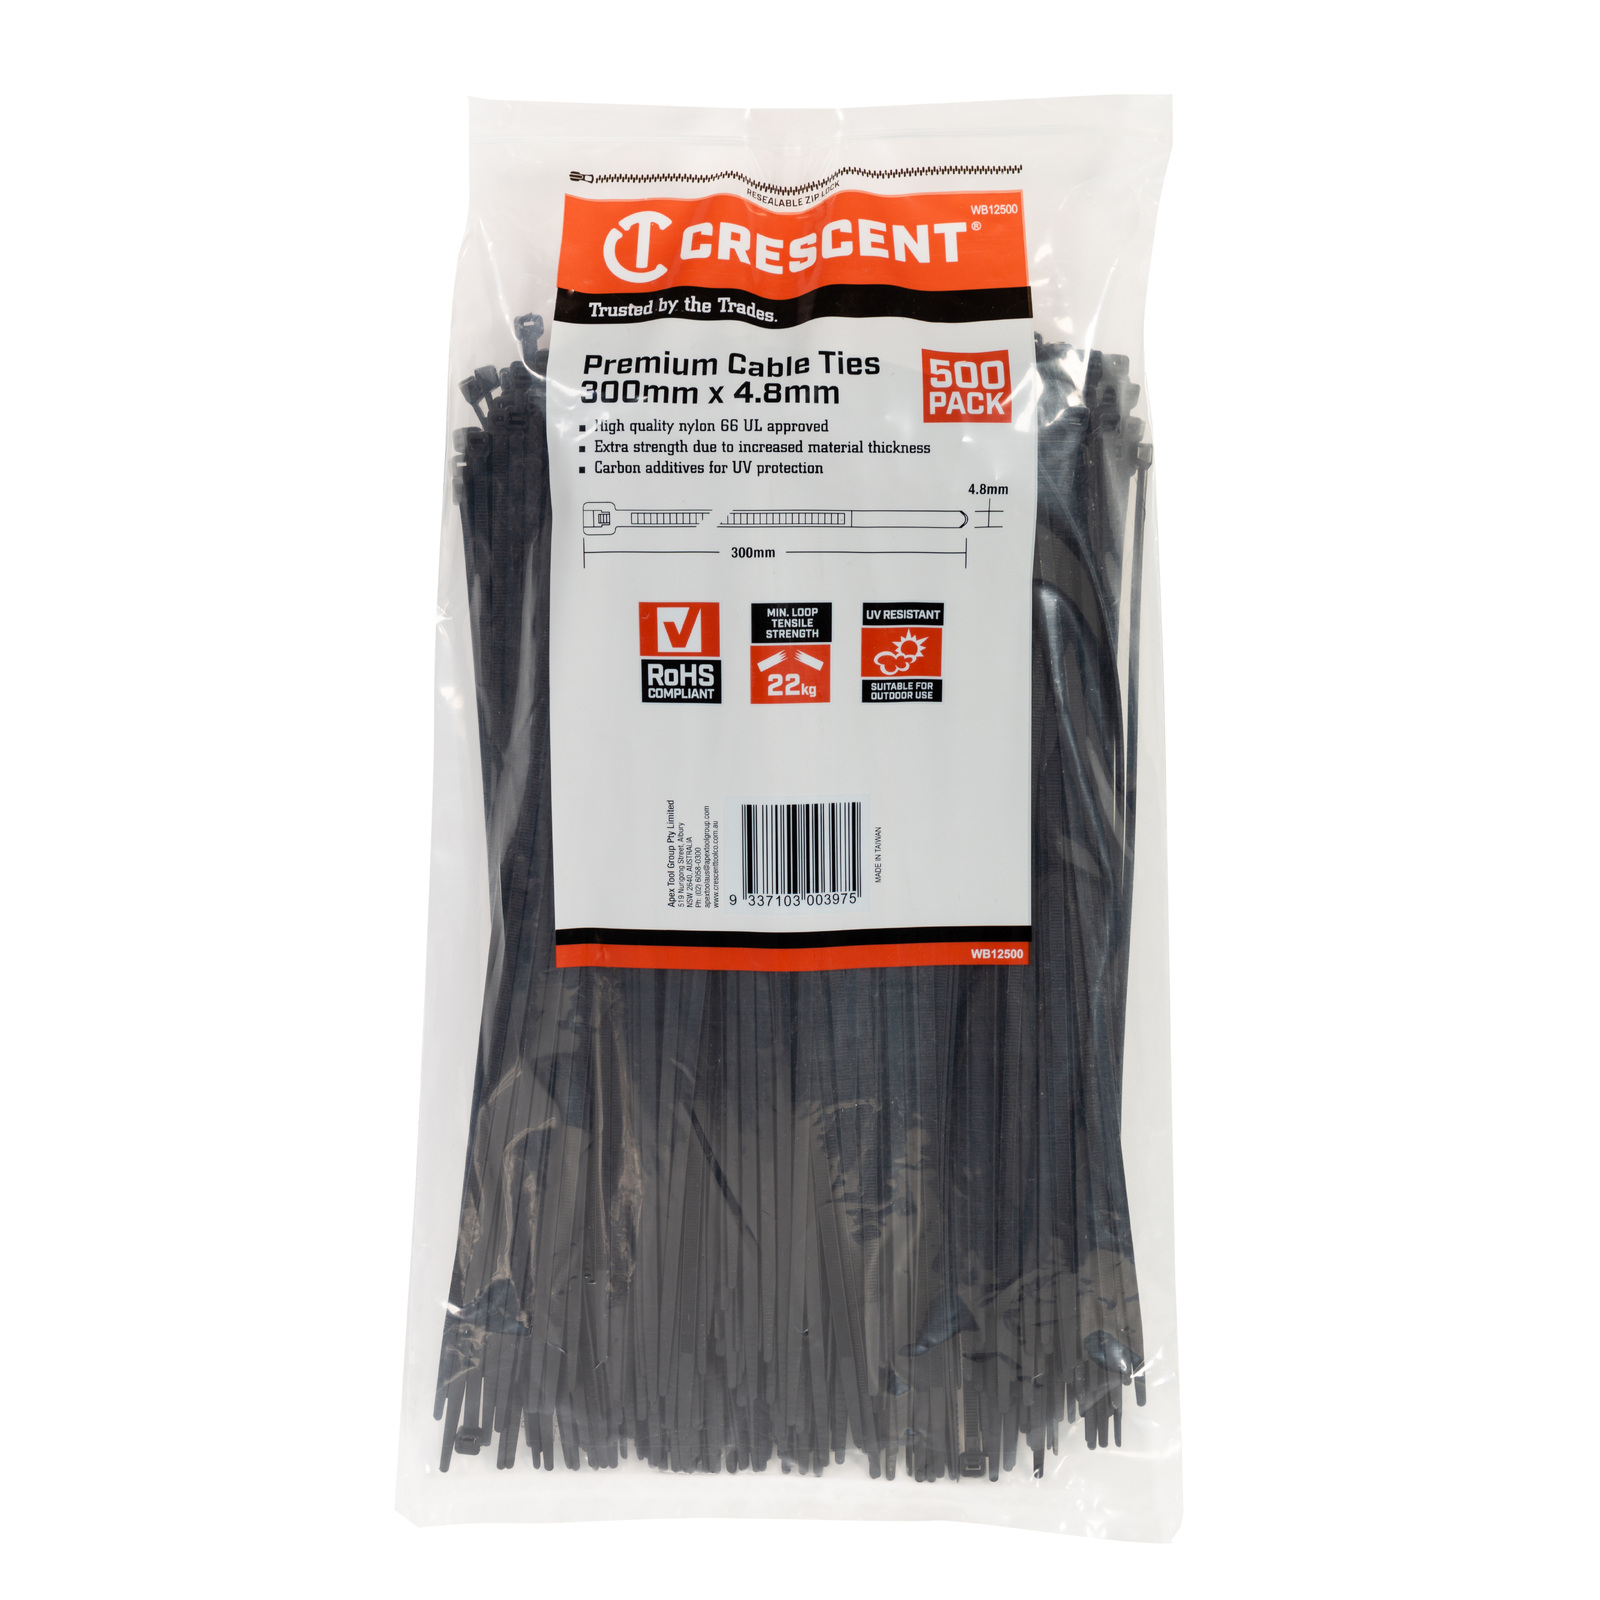 Crescent 300 x 4.8mm Black 500Pk Cable Ties WB12500